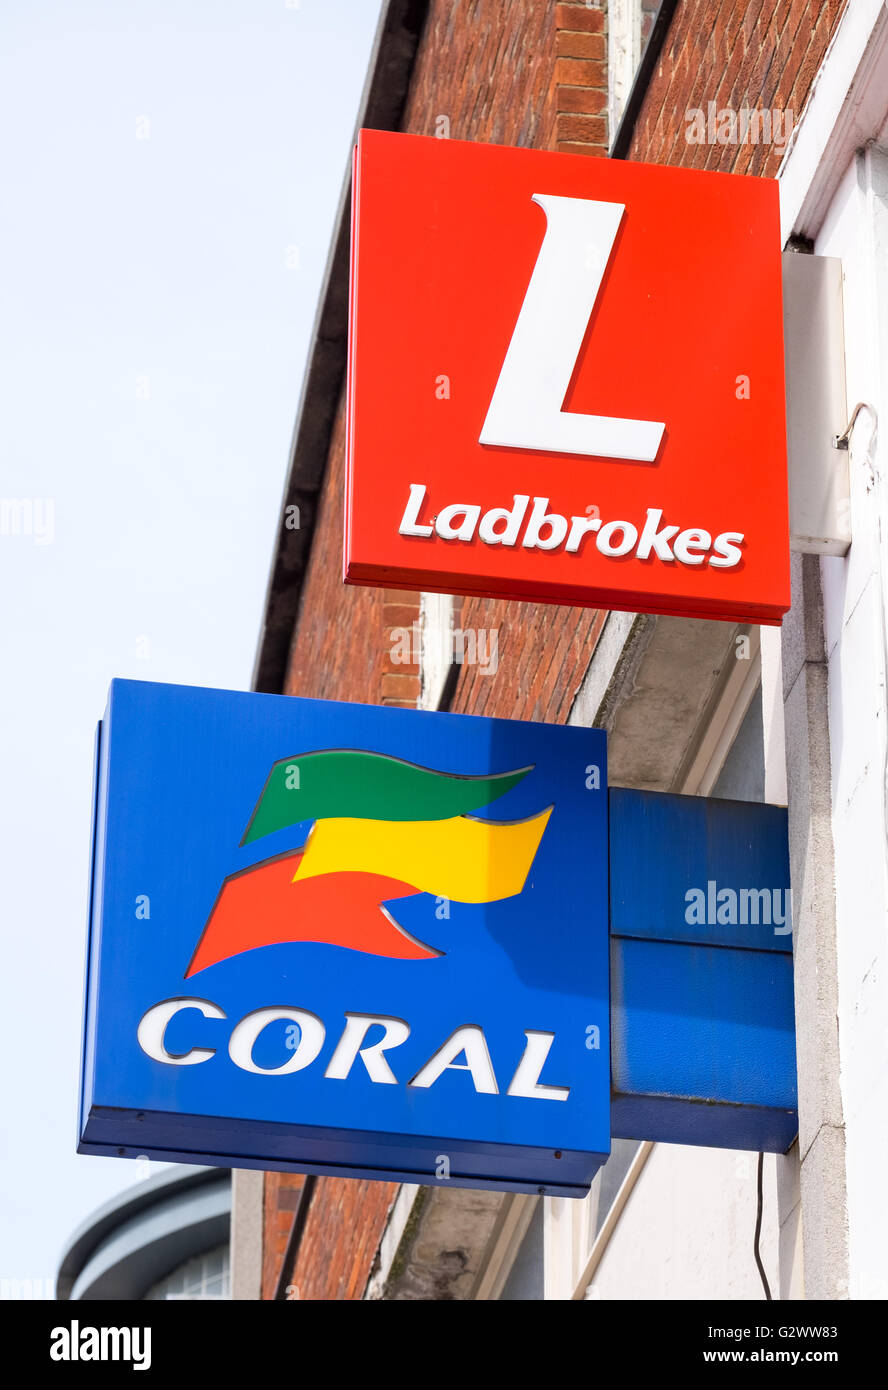 Coral and Ladbrokes betting shop signs next door to each other Stock Photo